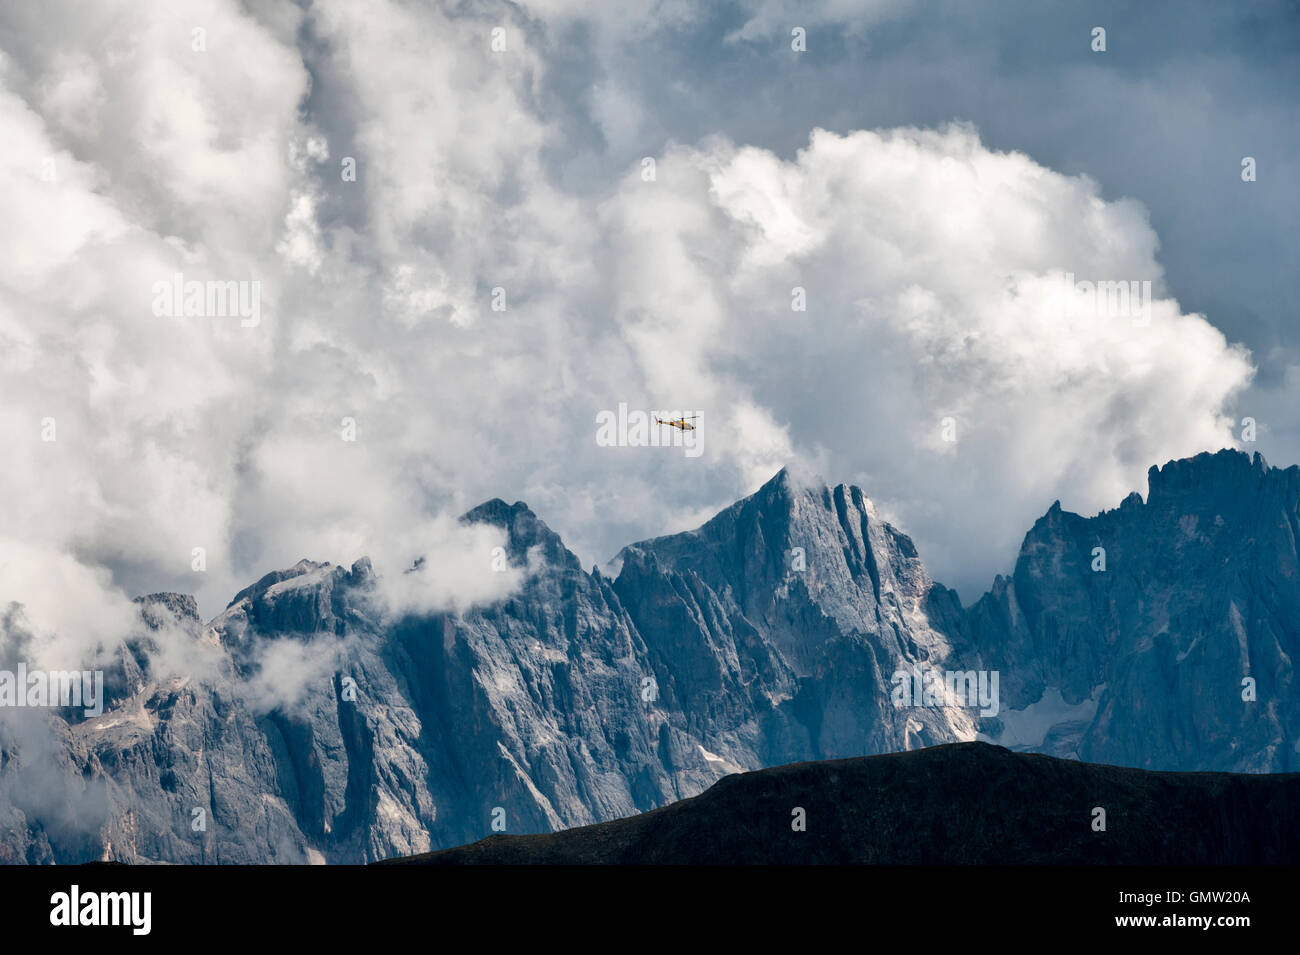 The Dolomites, Trentino, northern Italy. A mountain rescue helicopter flies over the peaks of Pale di San Martino in bad weather Stock Photo